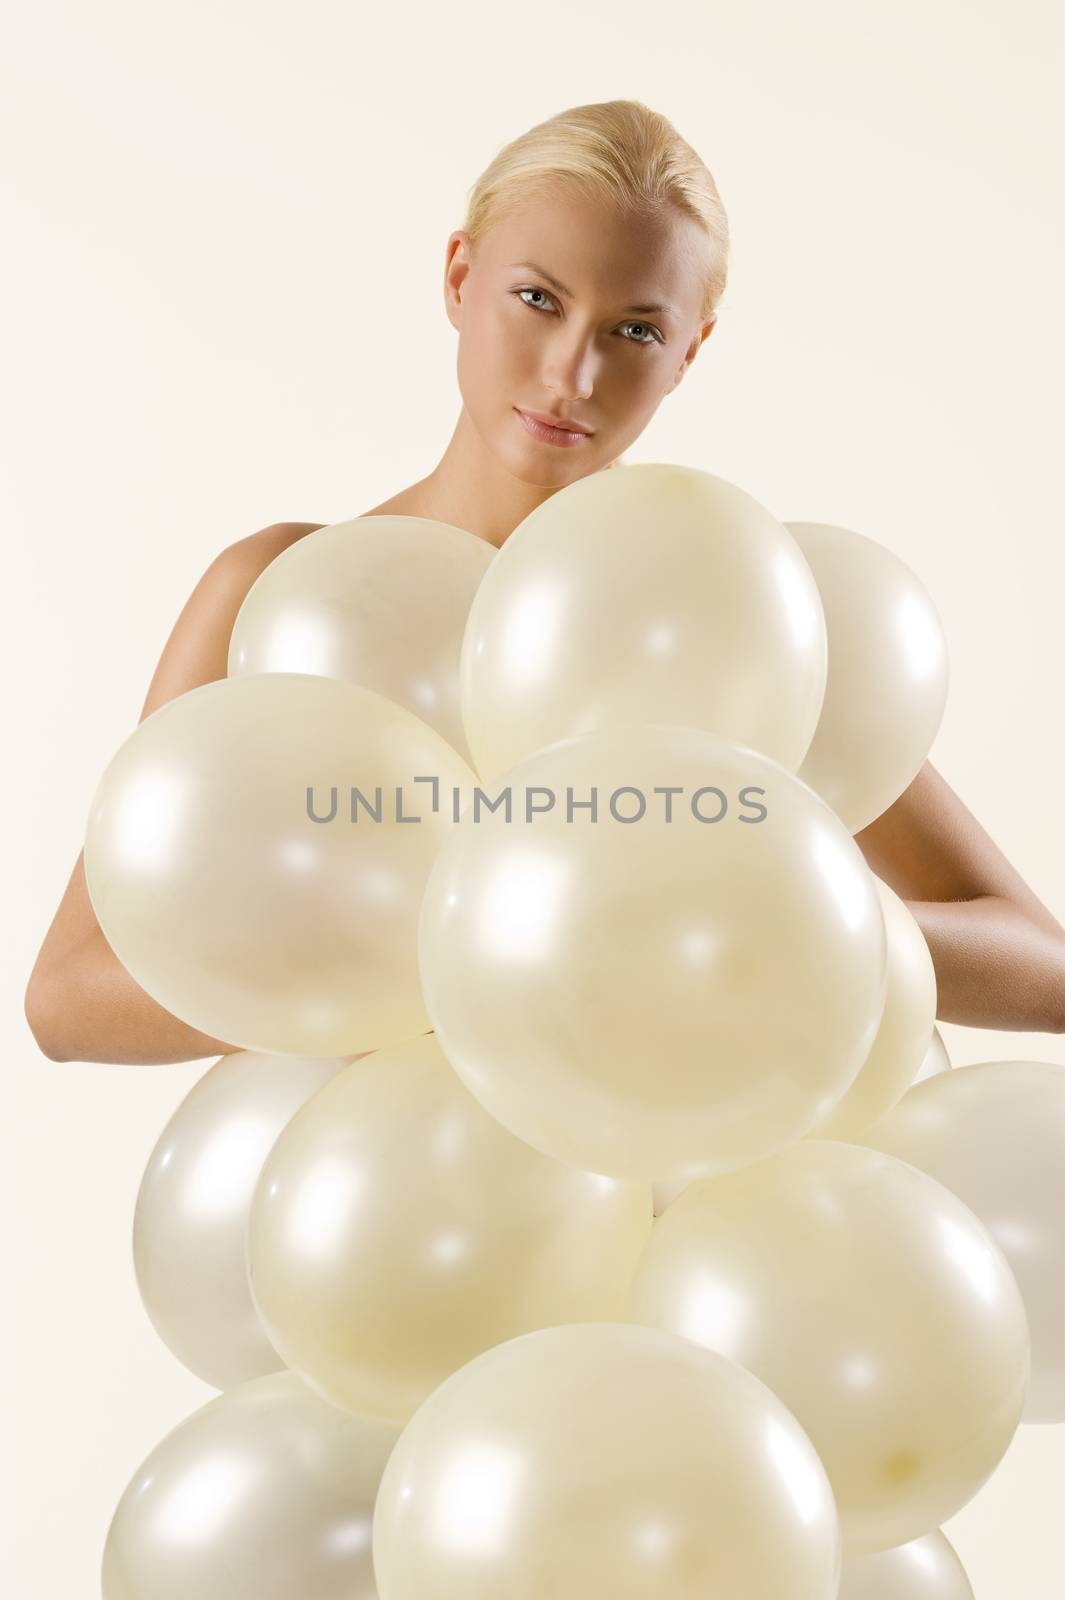 beautiful blond woman playing and covering her body with white balloons